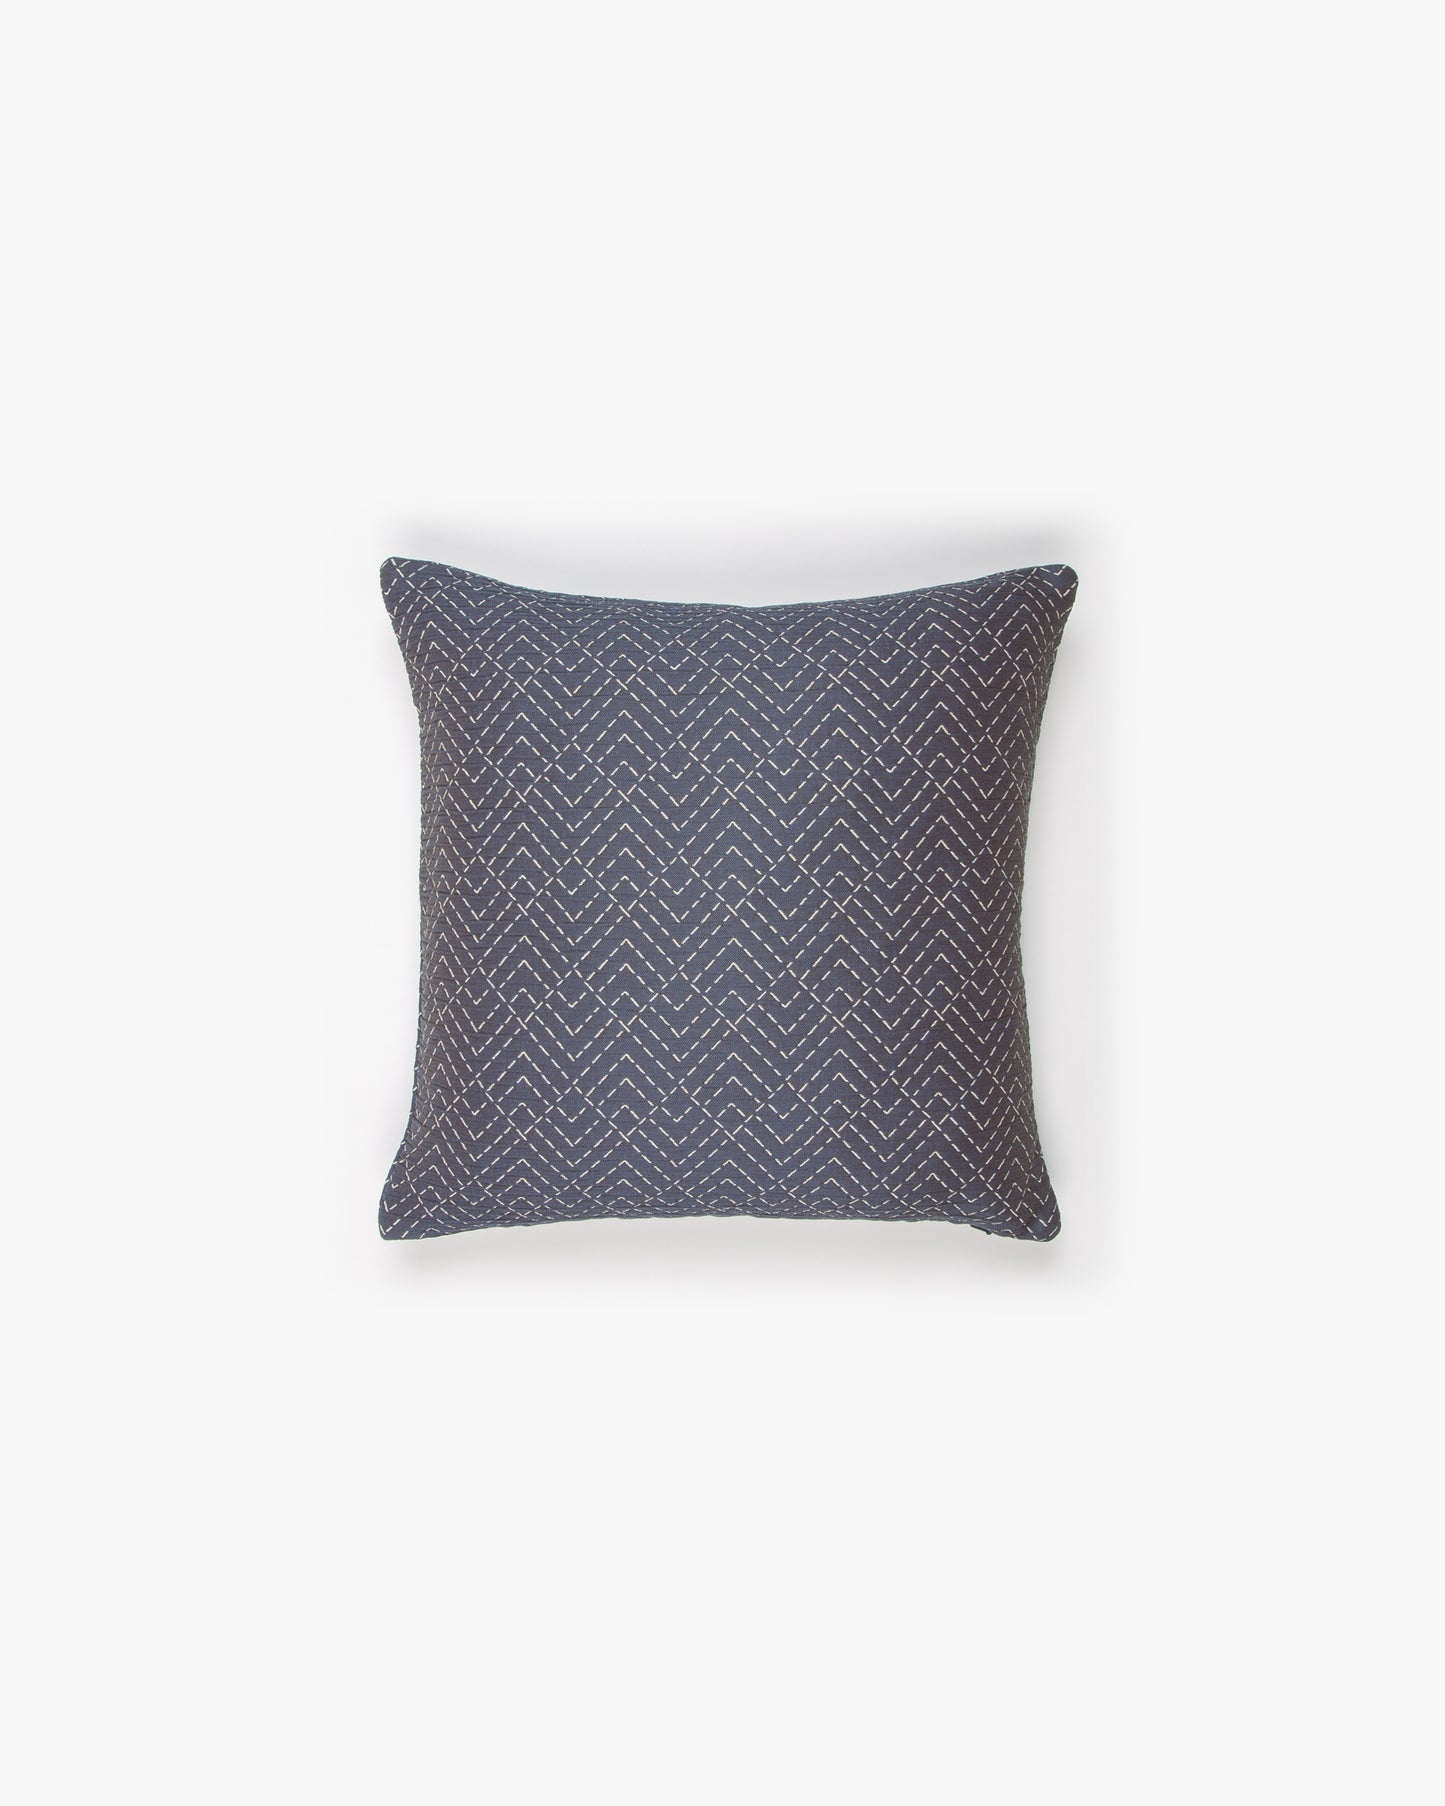 Corchal Cushion Cover